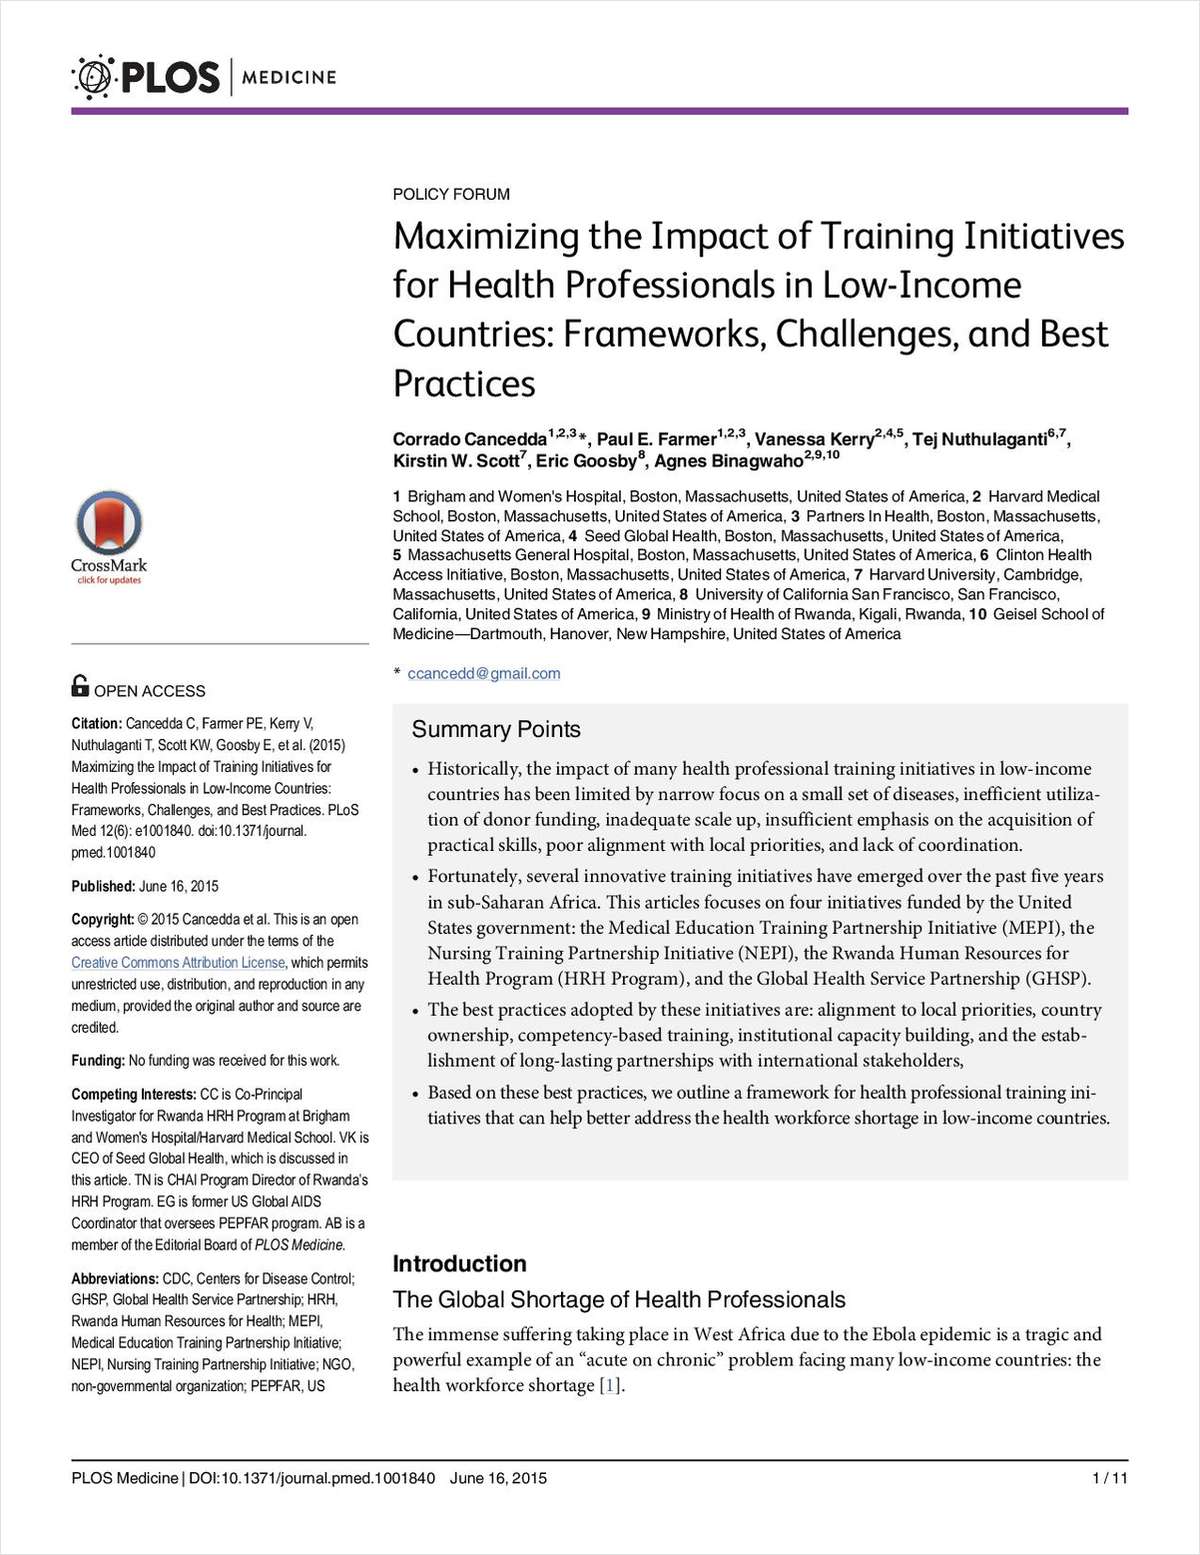 Maximizing the Impact of Training Initiatives for Health Professionals in Low-Income Countries